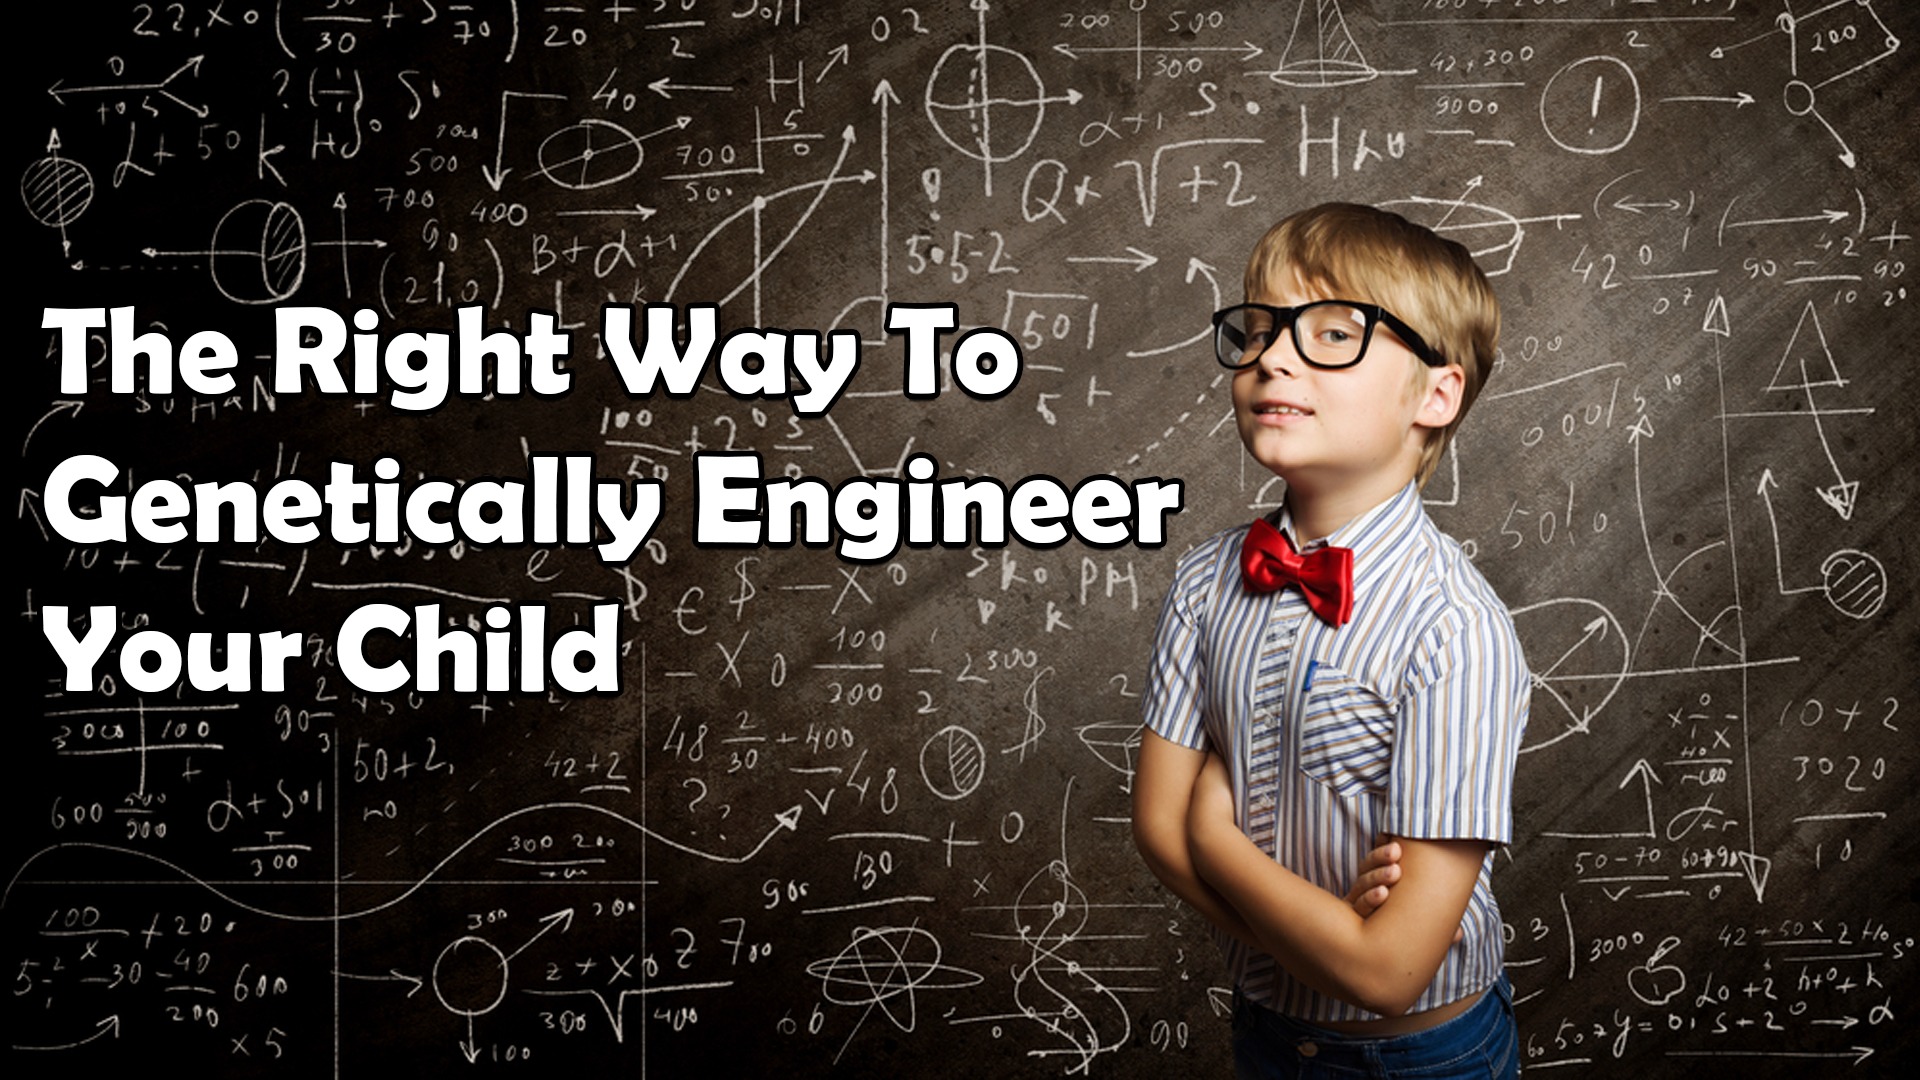 The Right way to Genetically Engineer your Child